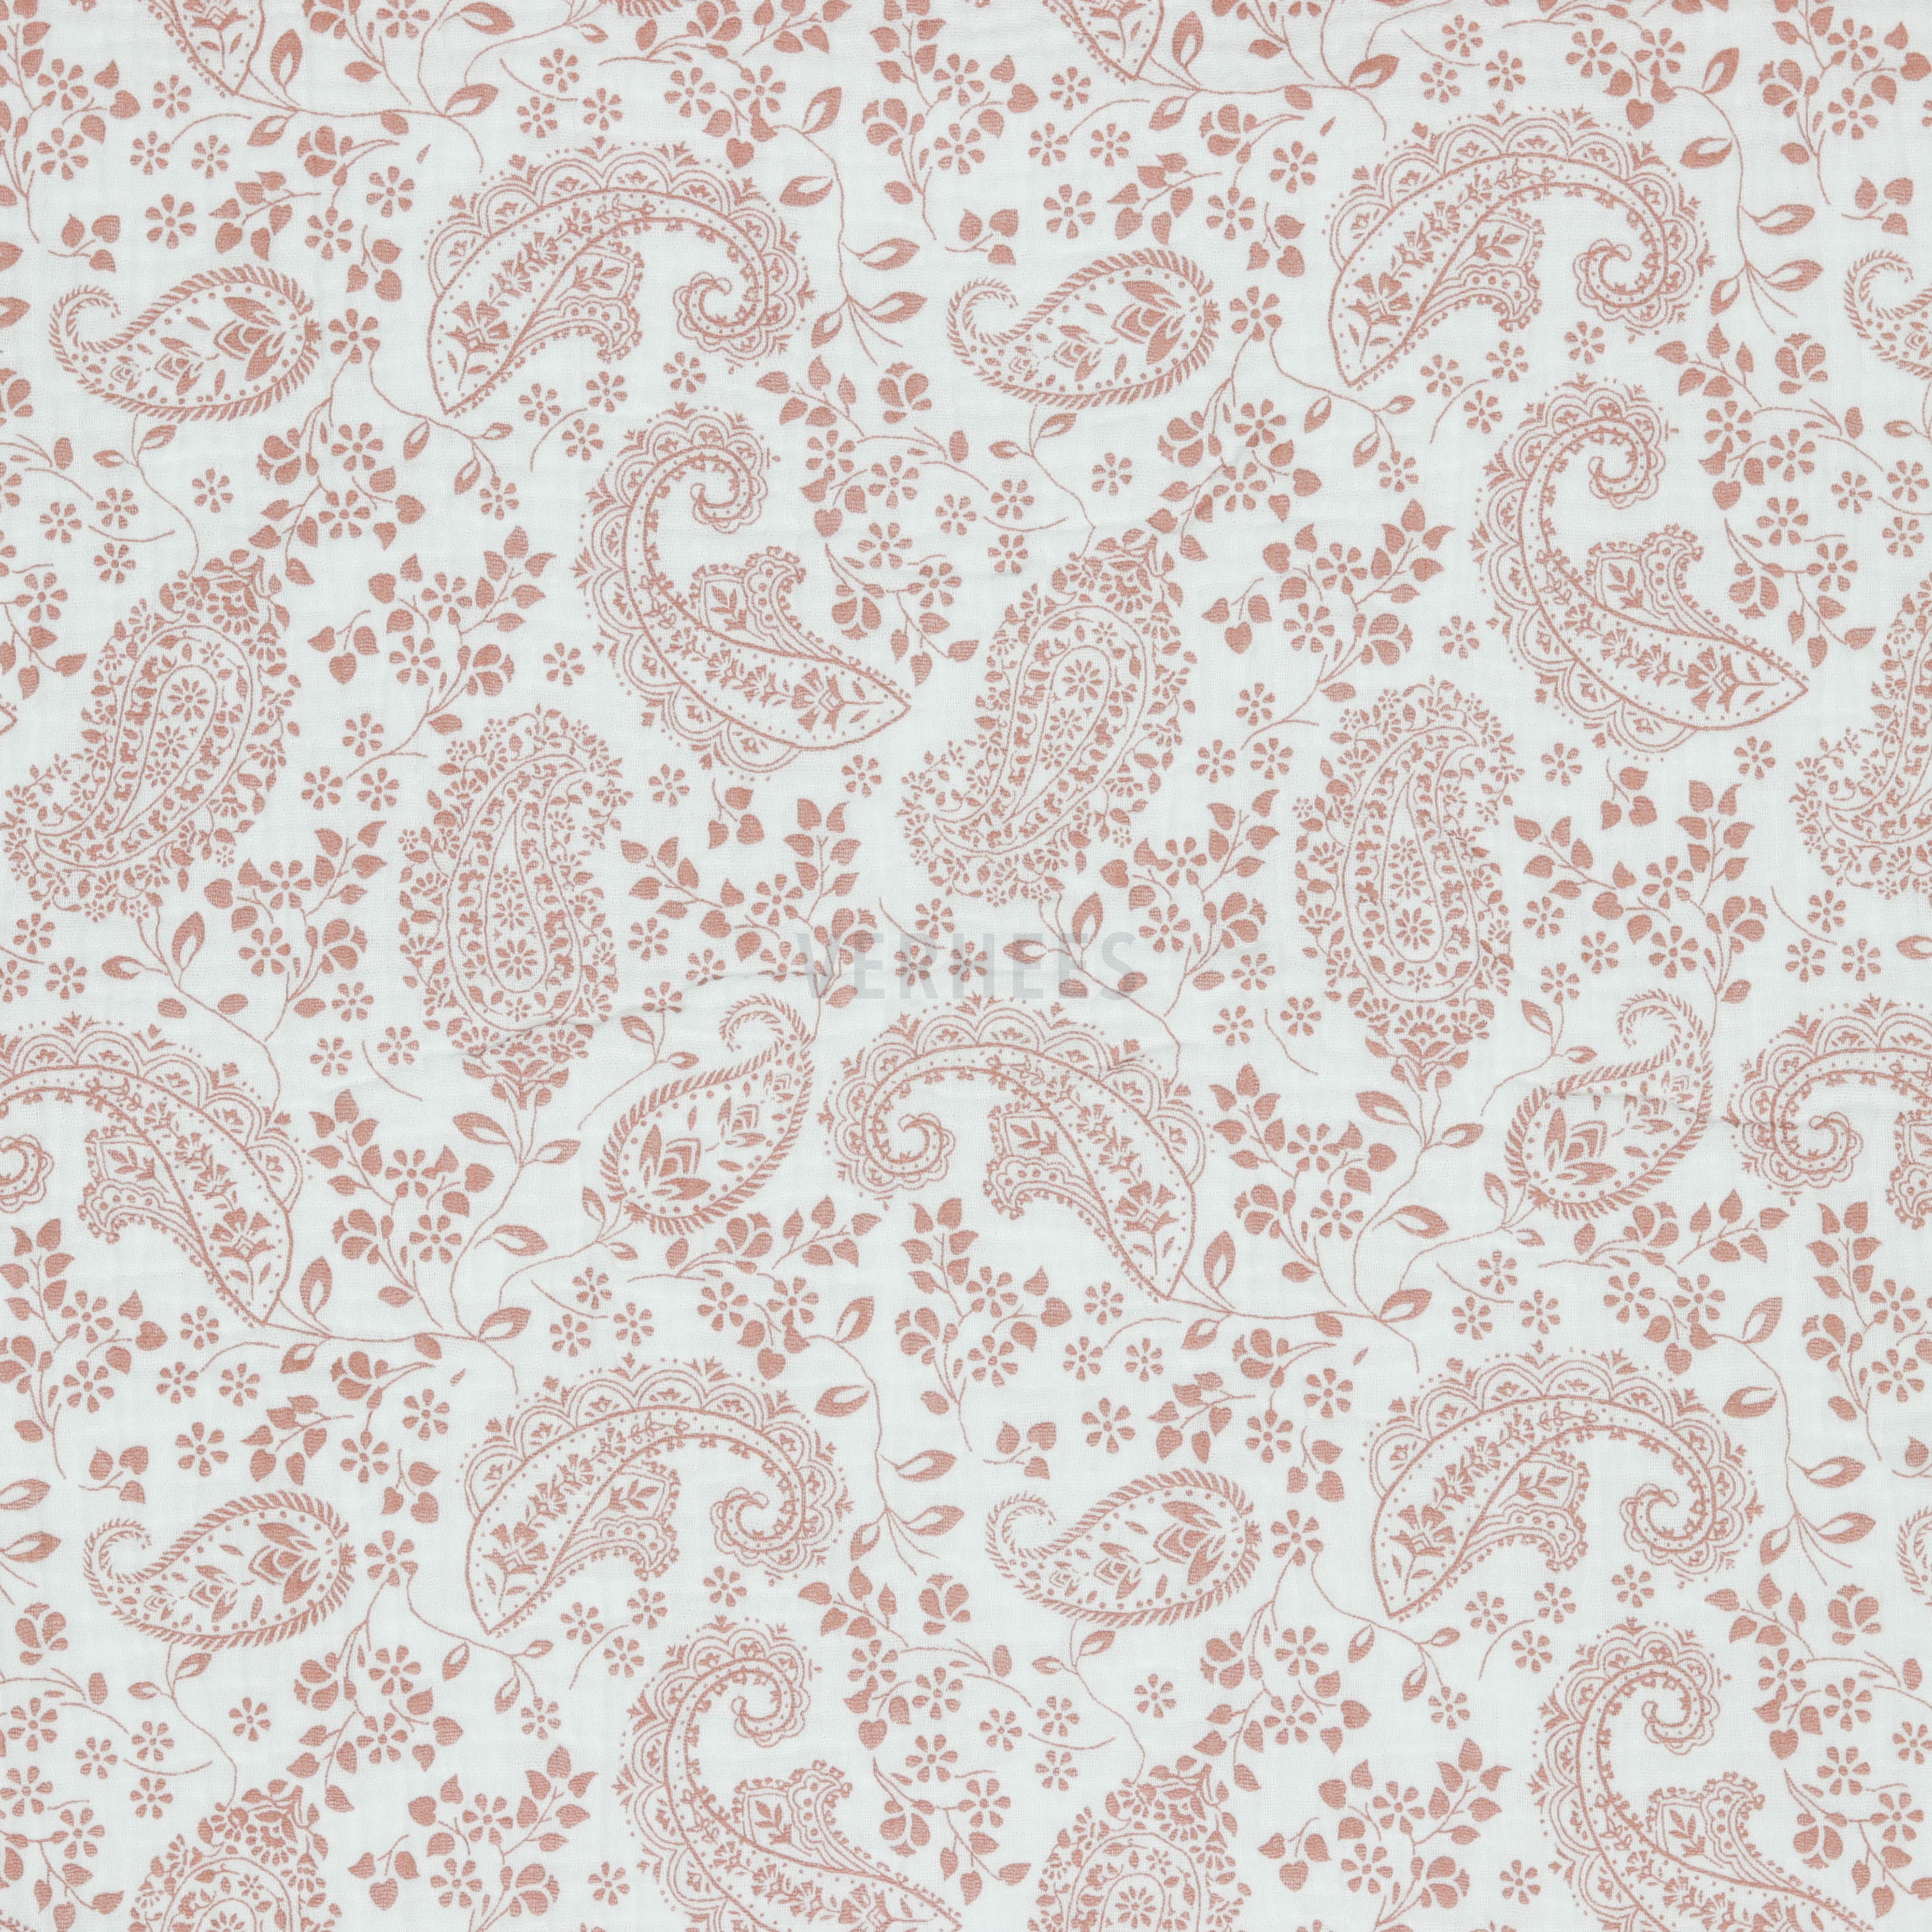 DOUBLE GAUZE GOTS PAISLEY FLOWERS WHITE (high resolution)